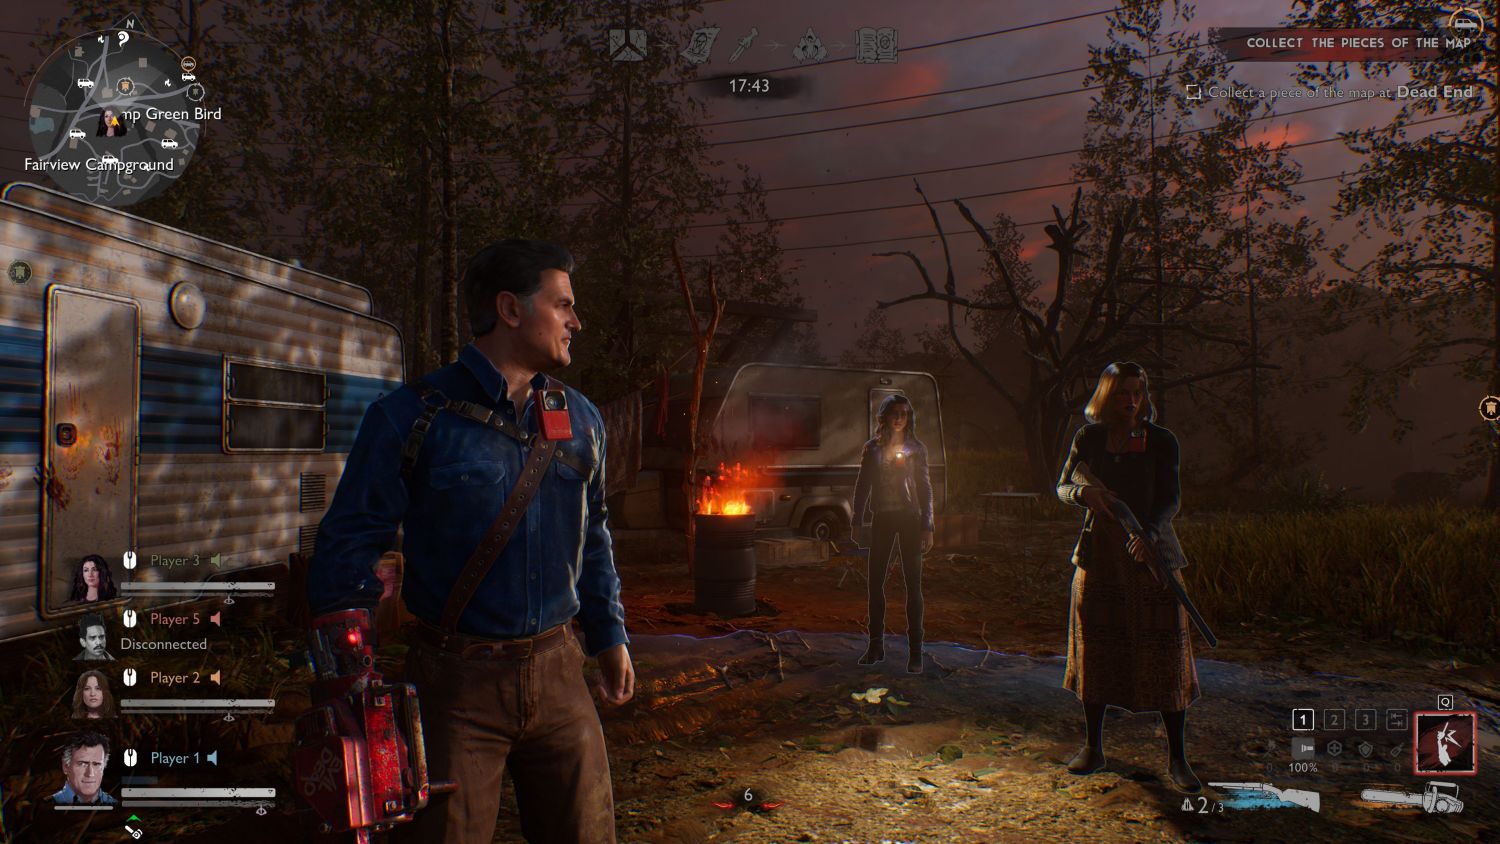 Geek Review - Evil Dead: The Game - Playing as Survivors